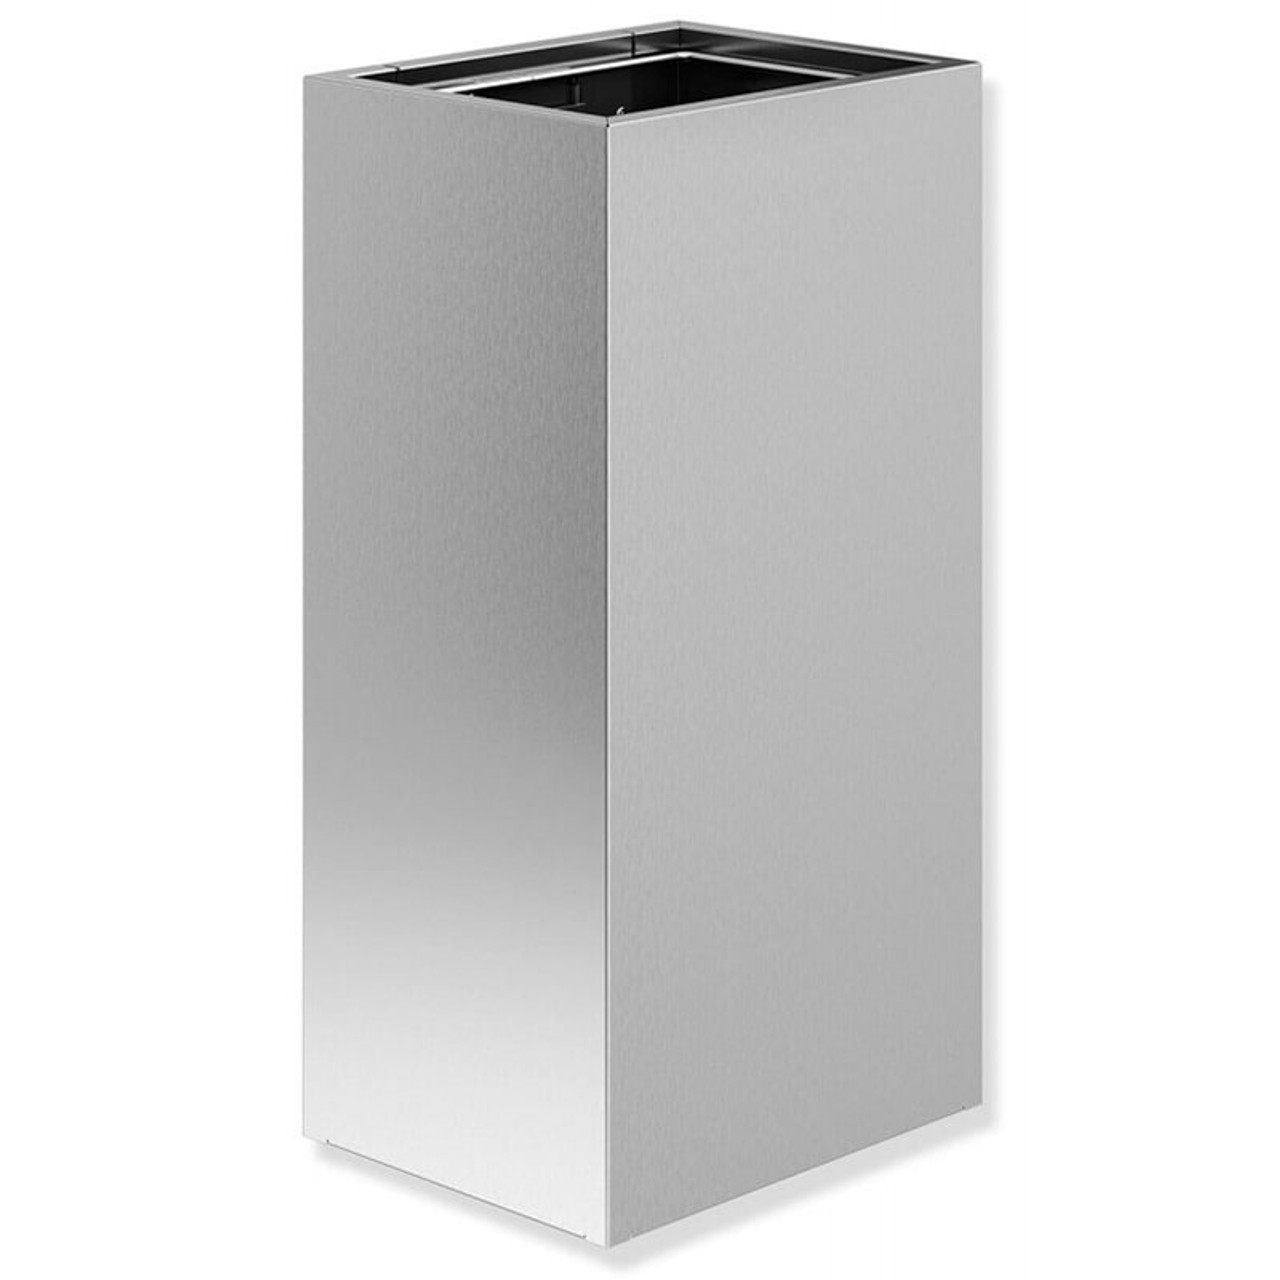 Wall Mounted Trash Can, Wall Mounted Garbage Can Manufacturer In